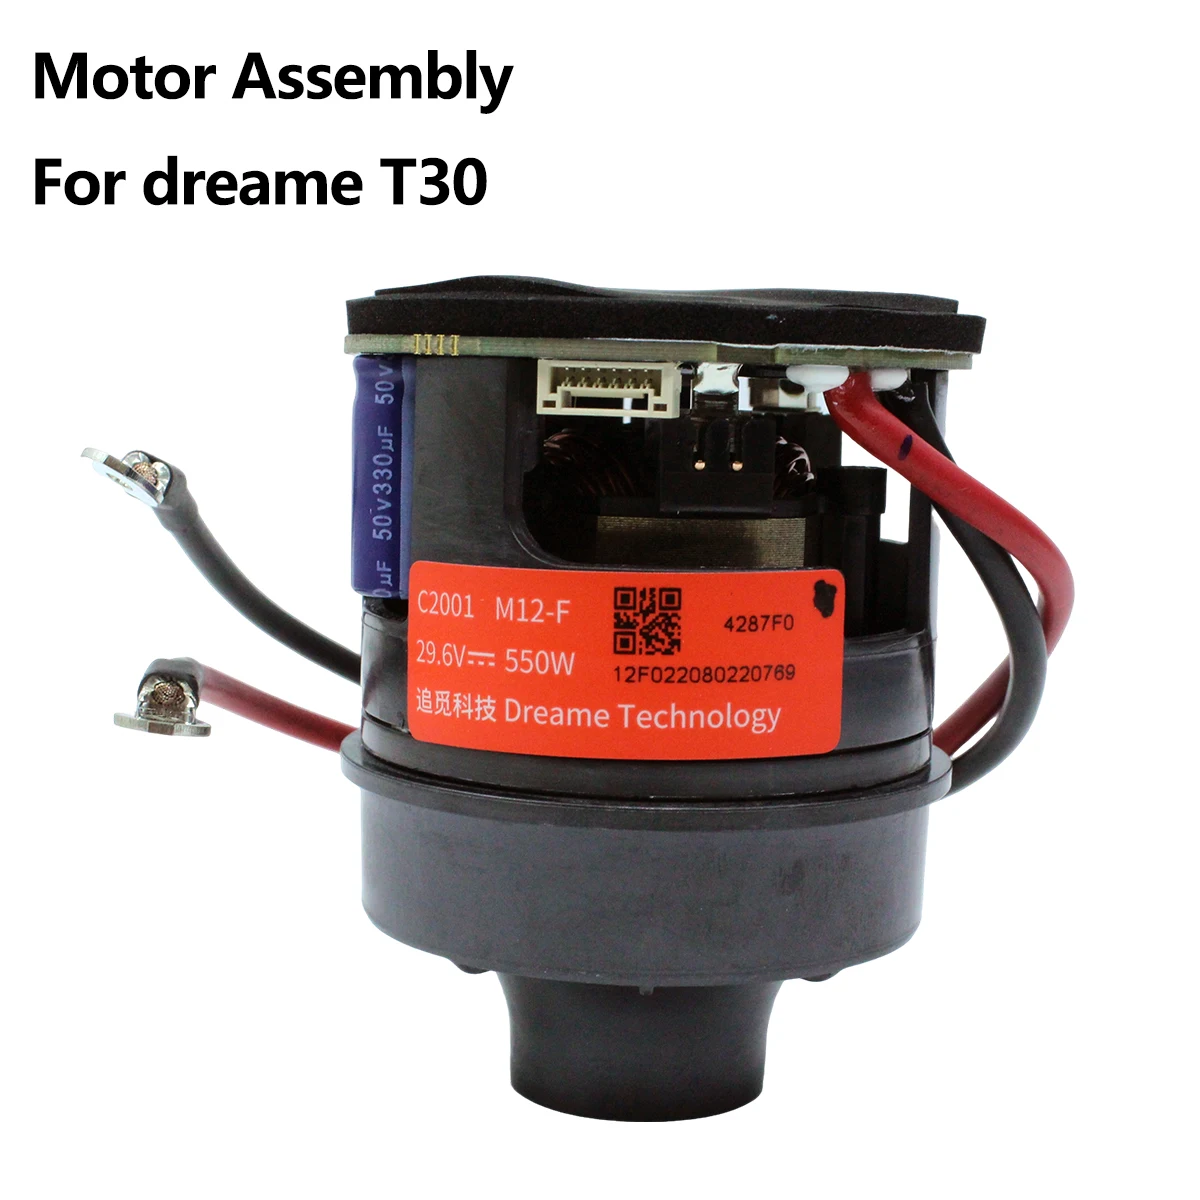 

Original Dreame T30 Handheld Vacuum Cleaner Motor Assembly Spare Parts Accessories Fan Module M12-F